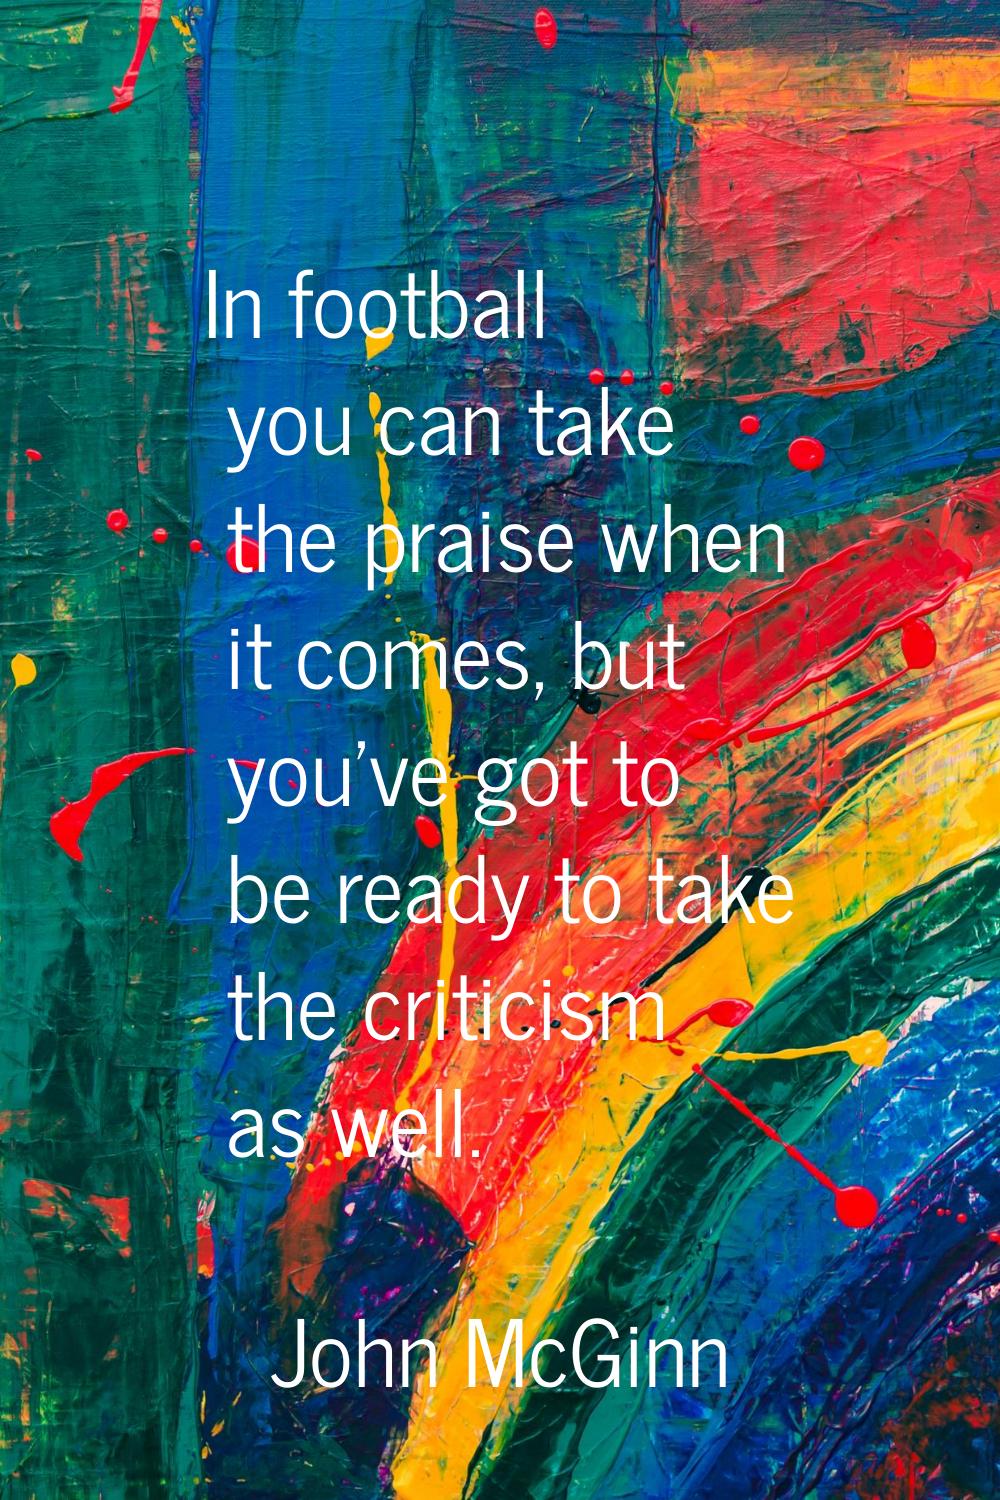 In football you can take the praise when it comes, but you've got to be ready to take the criticism